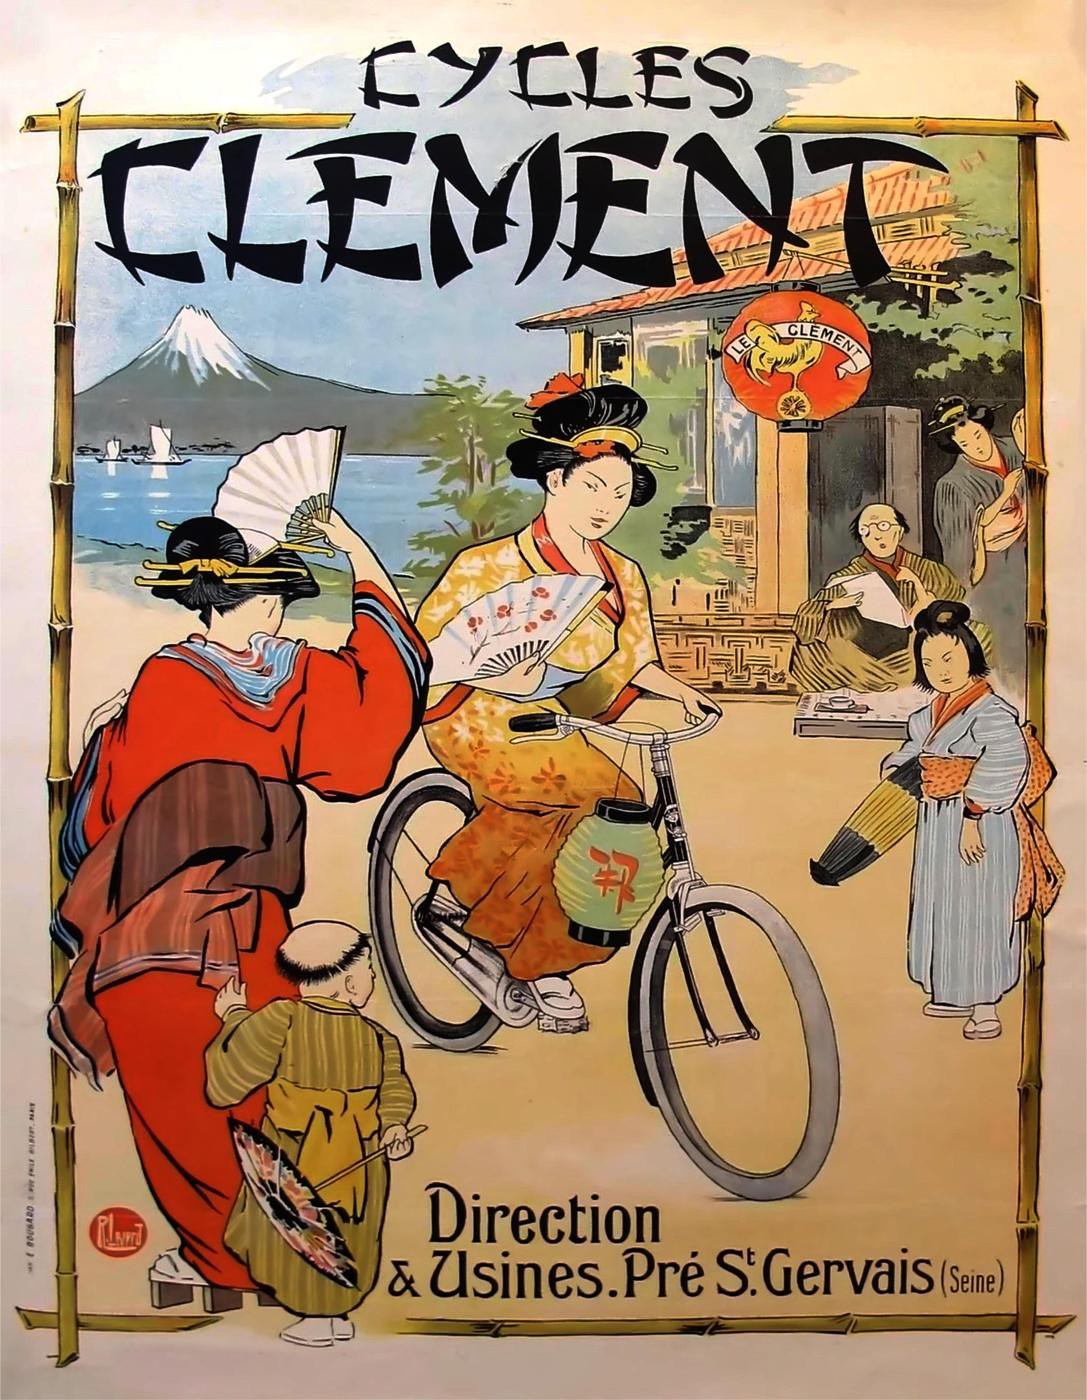 Clement Cycles - 1910